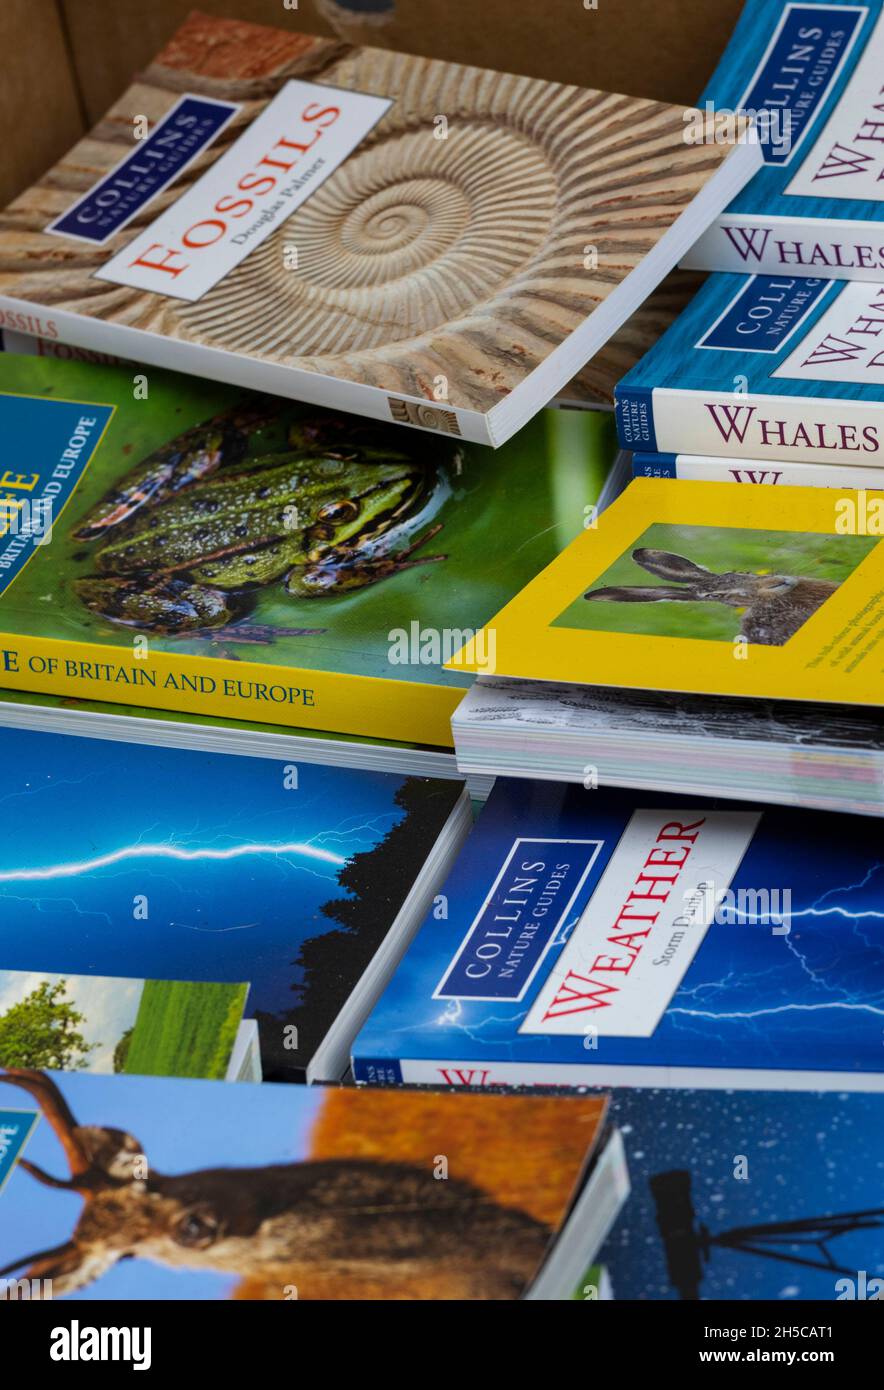 natural history educational books, colourful books on nature and wildlife, teacing and learning literature, wildlife books at bookshop, booksellers. Stock Photo